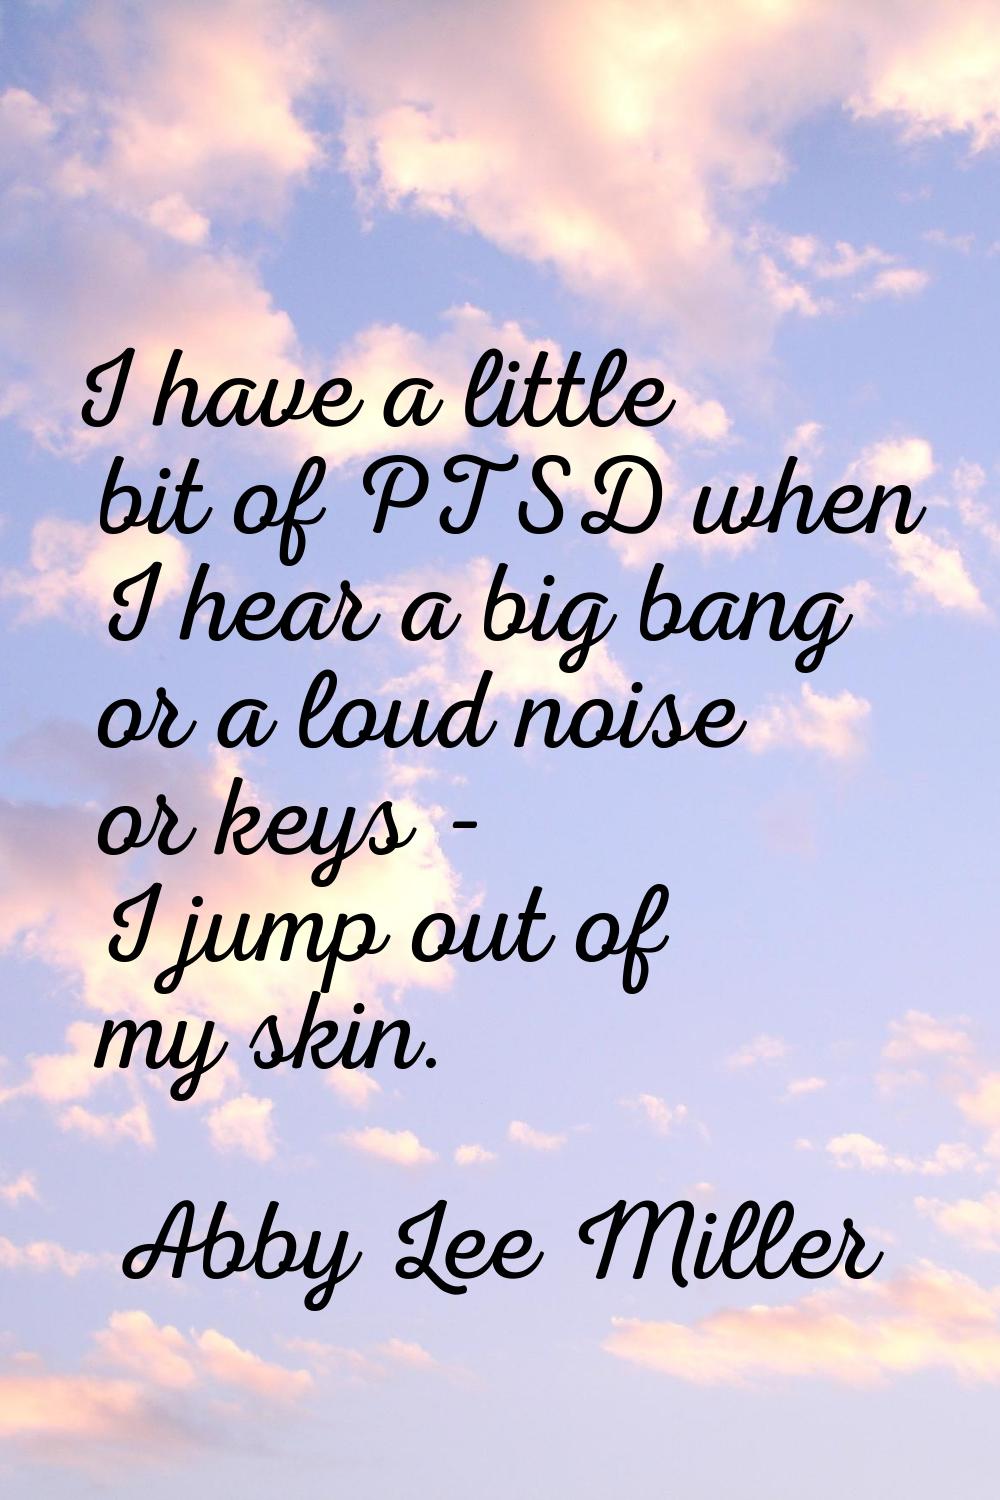 I have a little bit of PTSD when I hear a big bang or a loud noise or keys - I jump out of my skin.